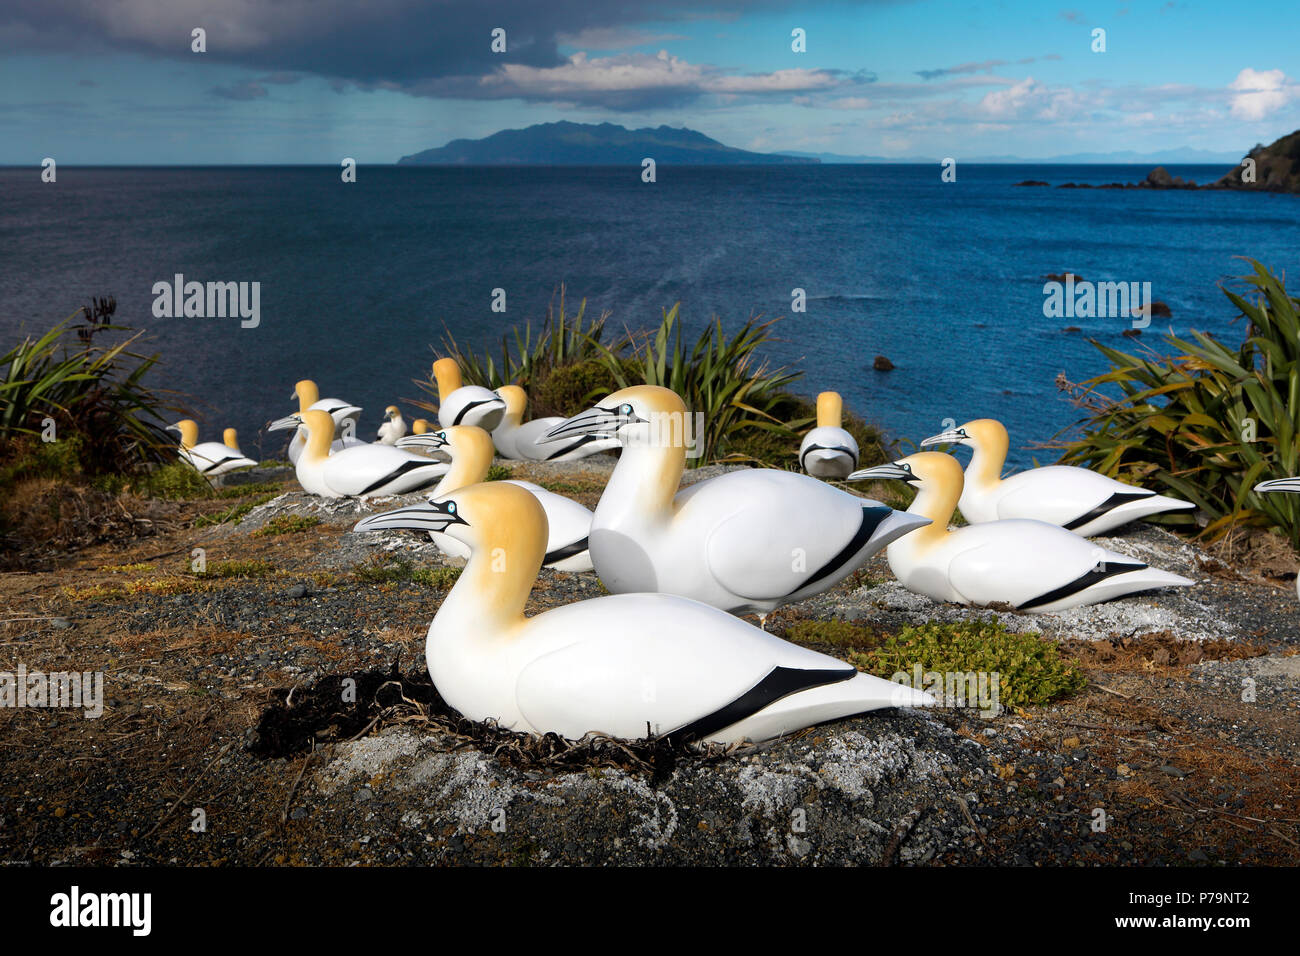 Australasian gannet decoys used to try and form new colony at Tawharanui Regional Park, New Zealand Stock Photo